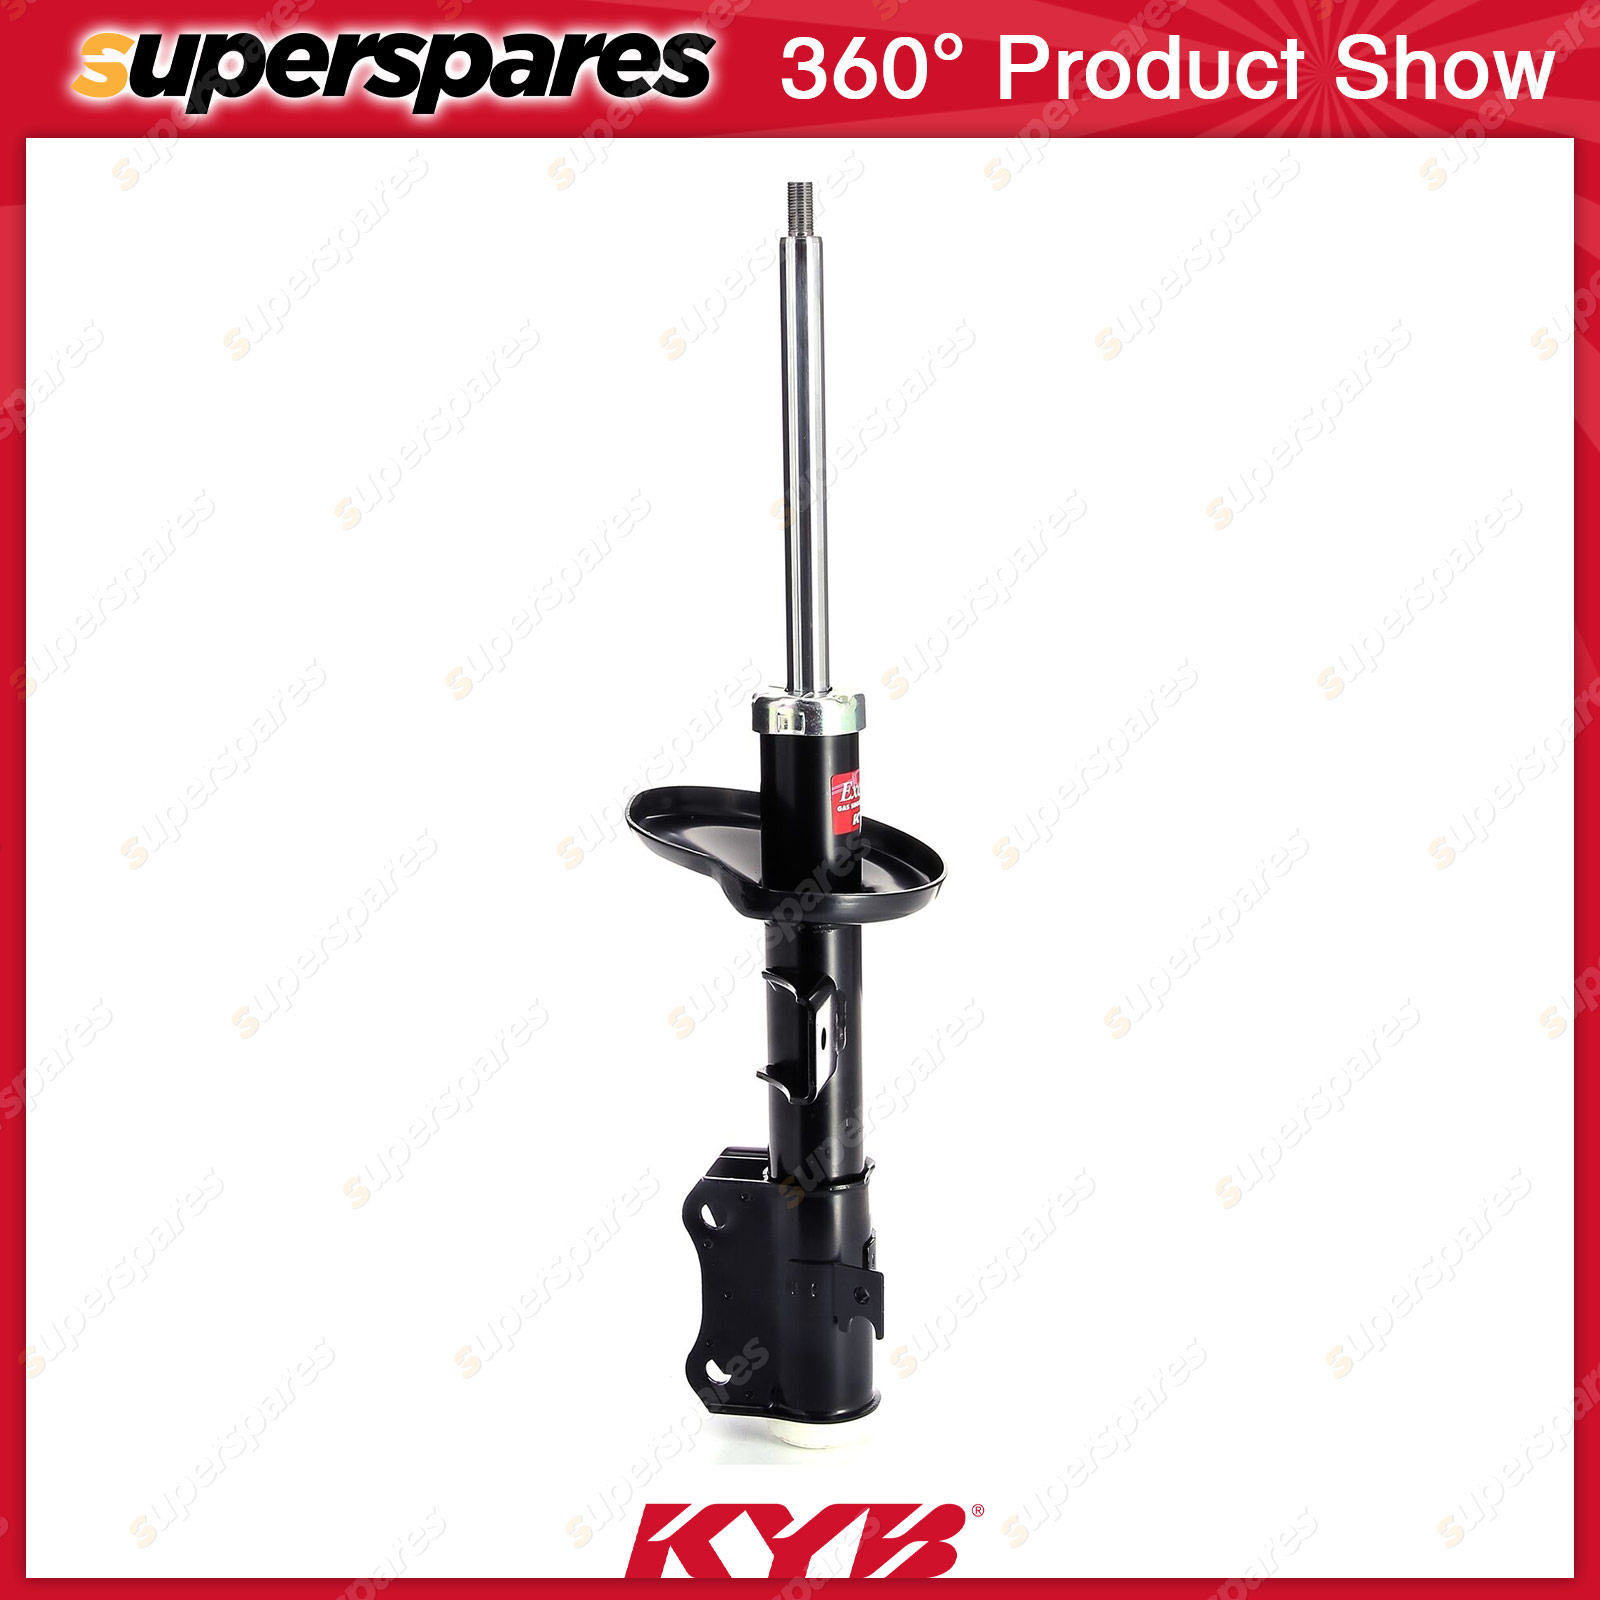 Front + Rear KYB EXCEL-G Shock Absorbers for SUZUKI Grand Vitara 